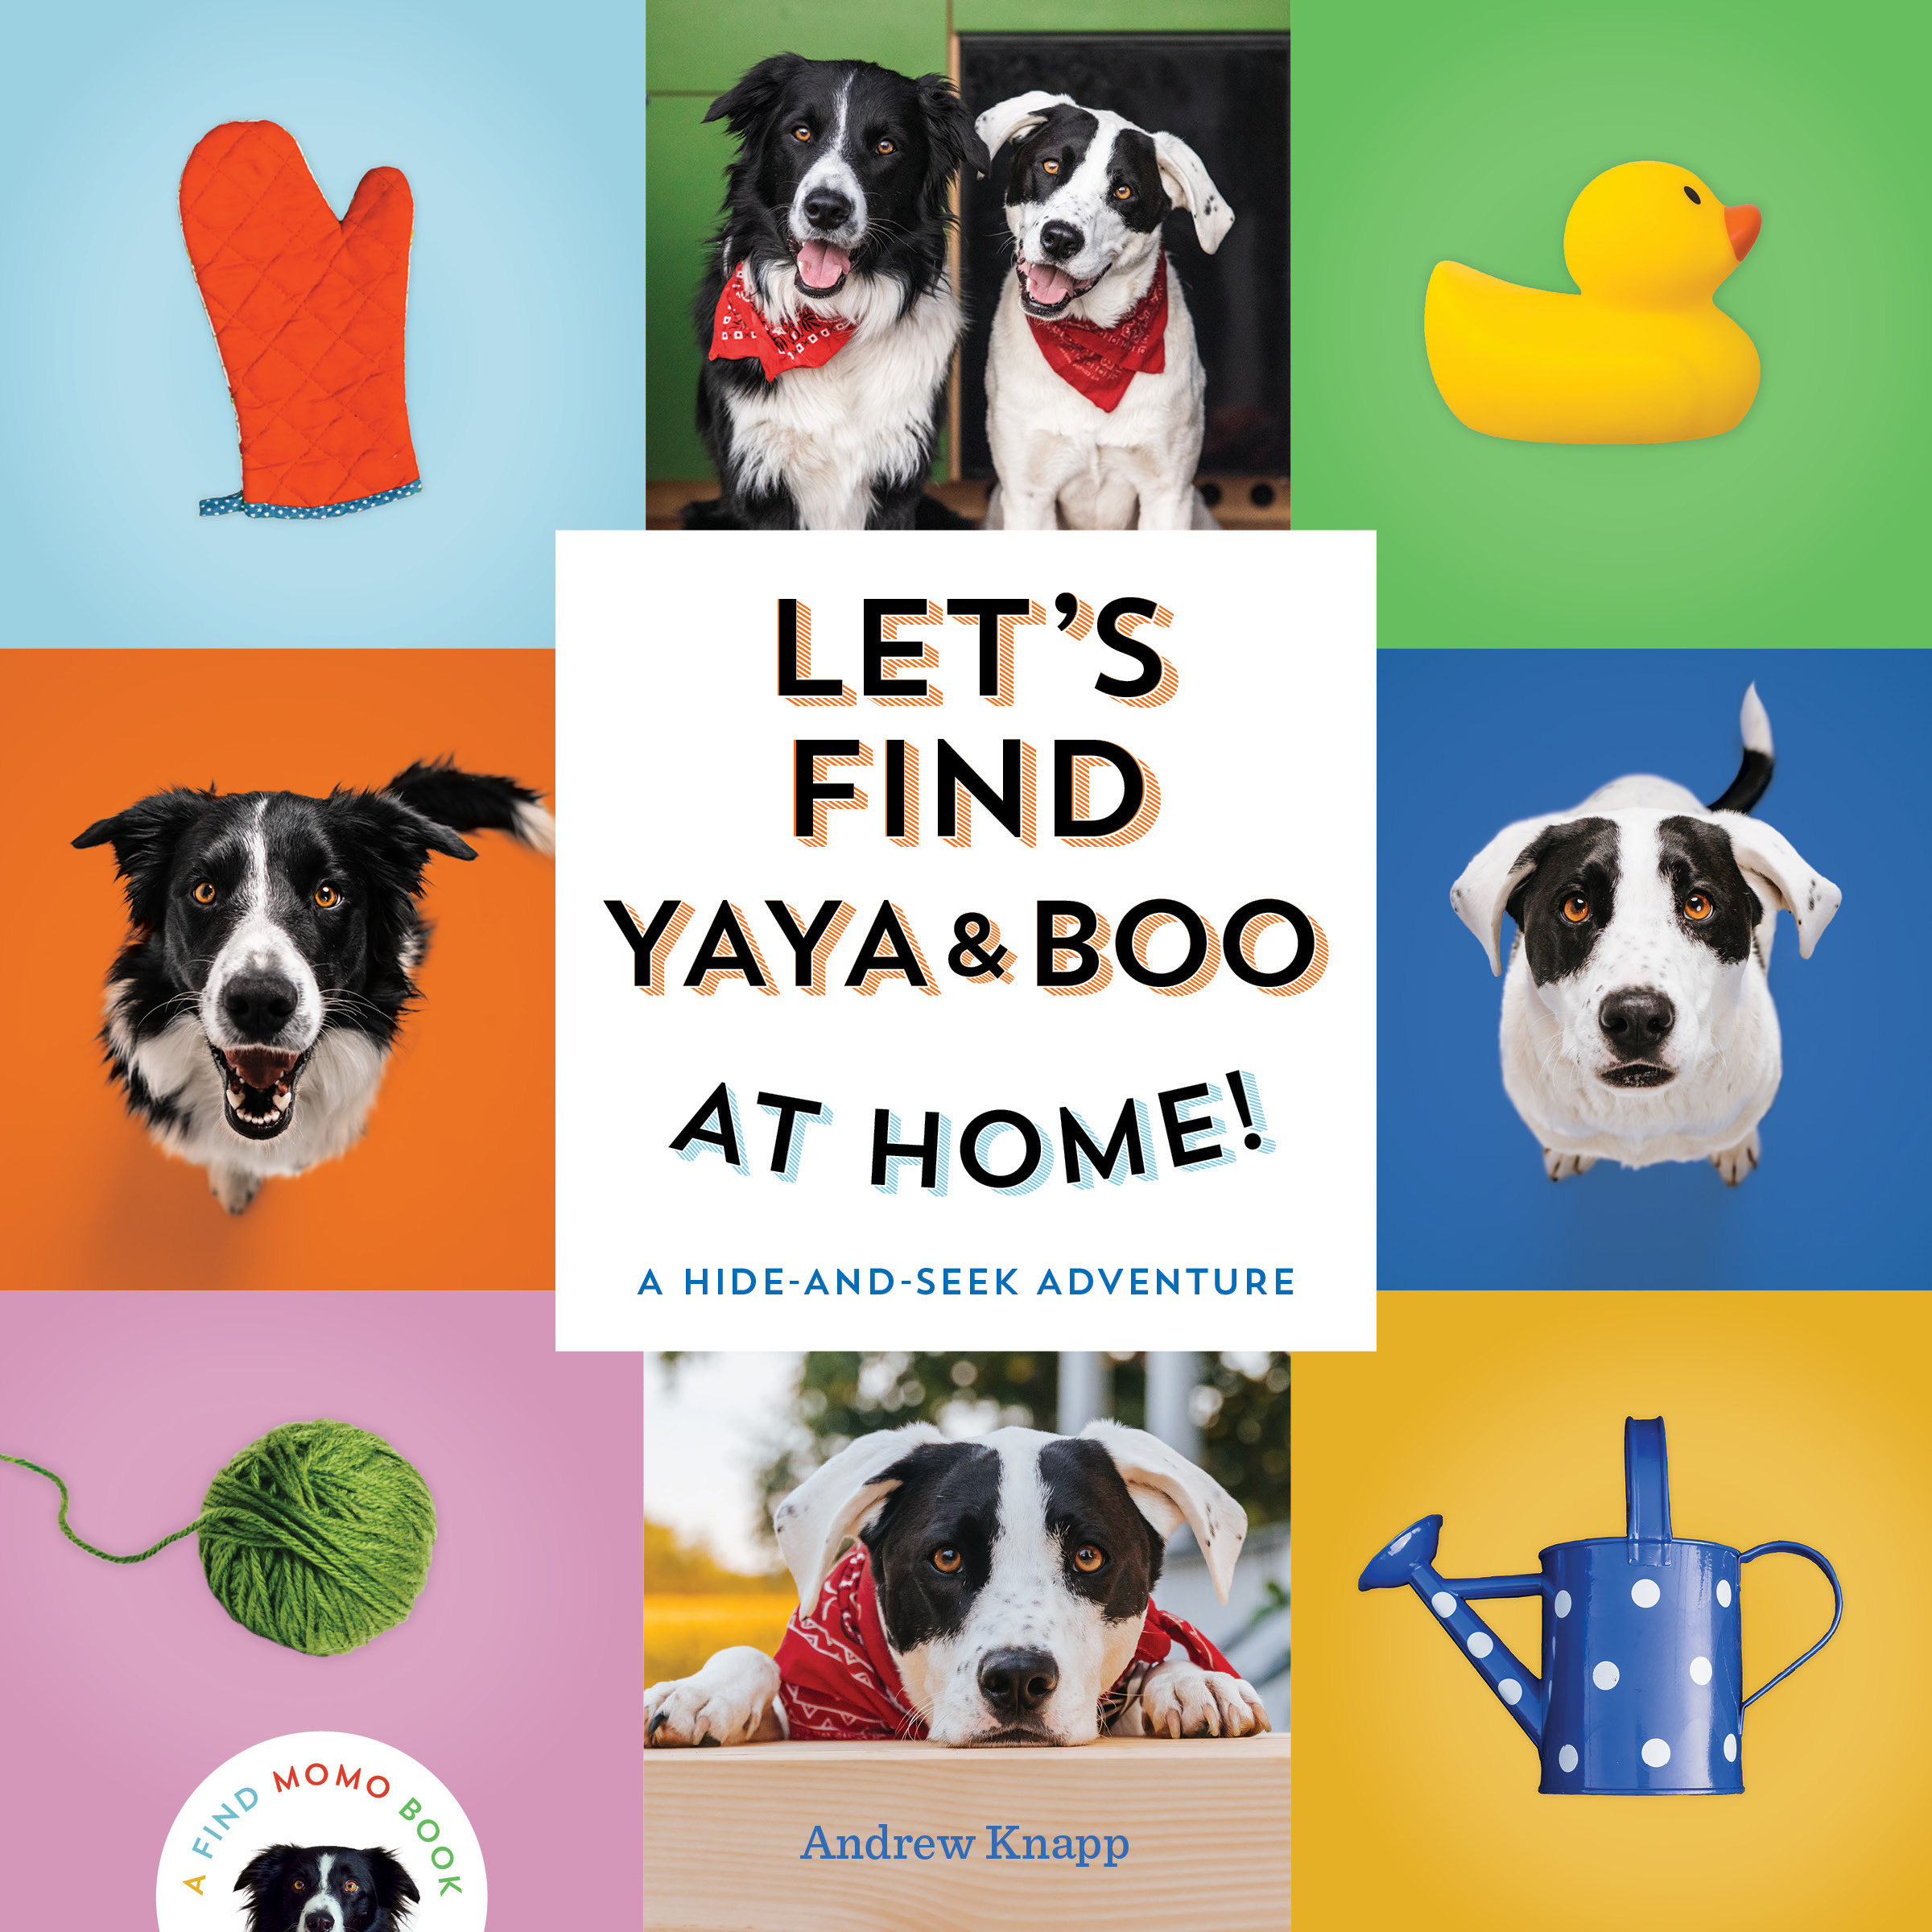 Let’s Find Yaya and Boo At Home!